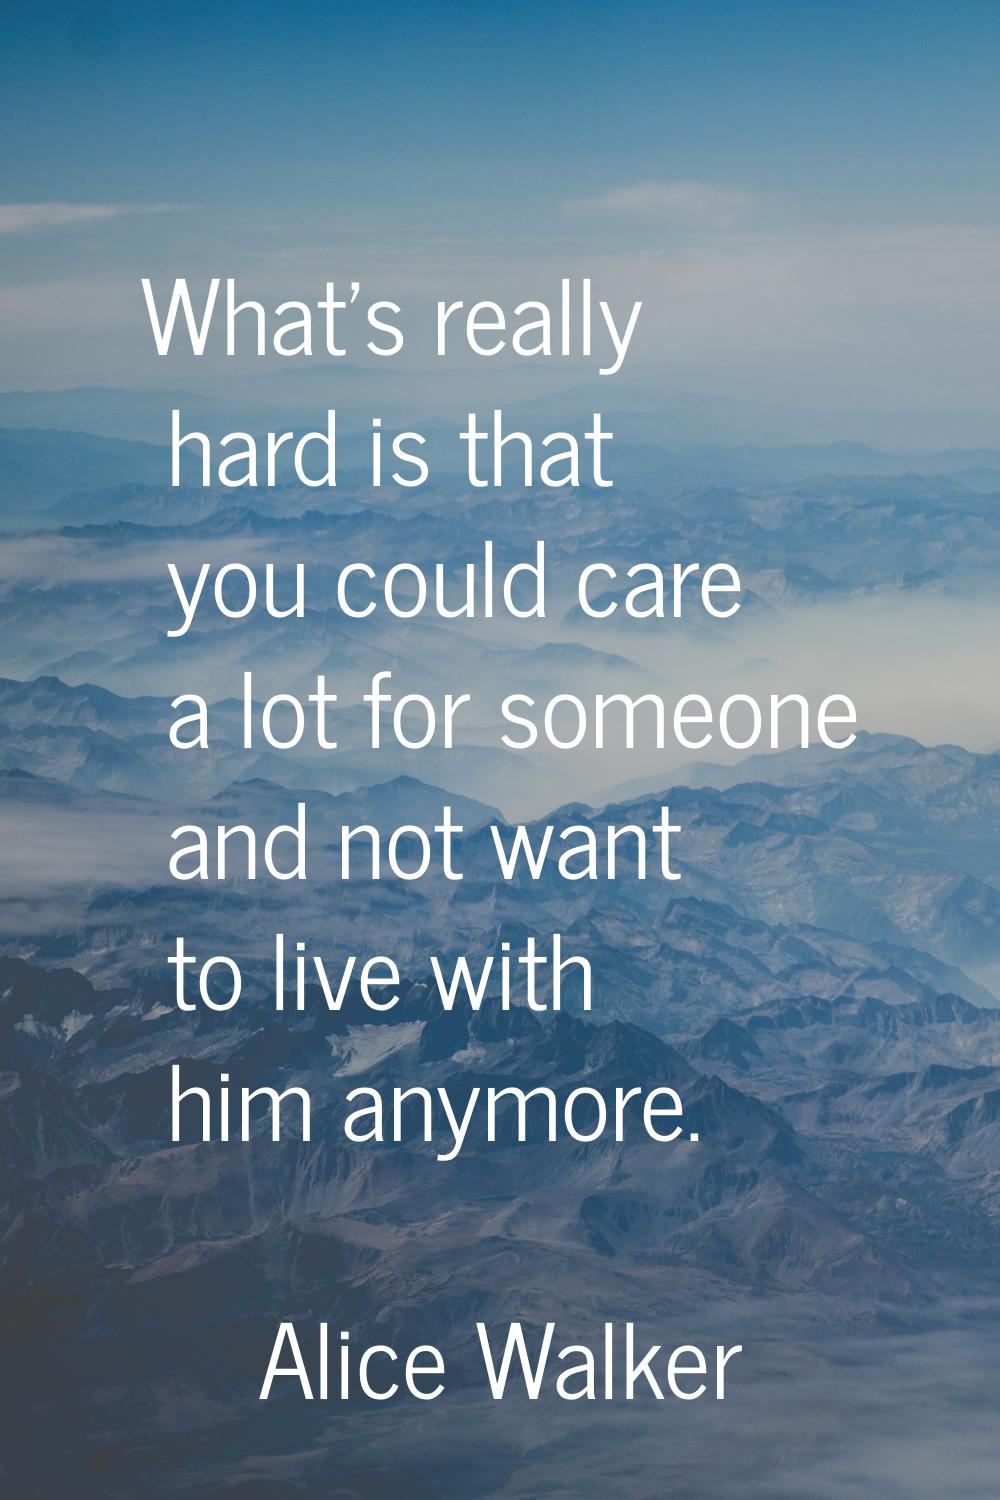 What's really hard is that you could care a lot for someone and not want to live with him anymore.